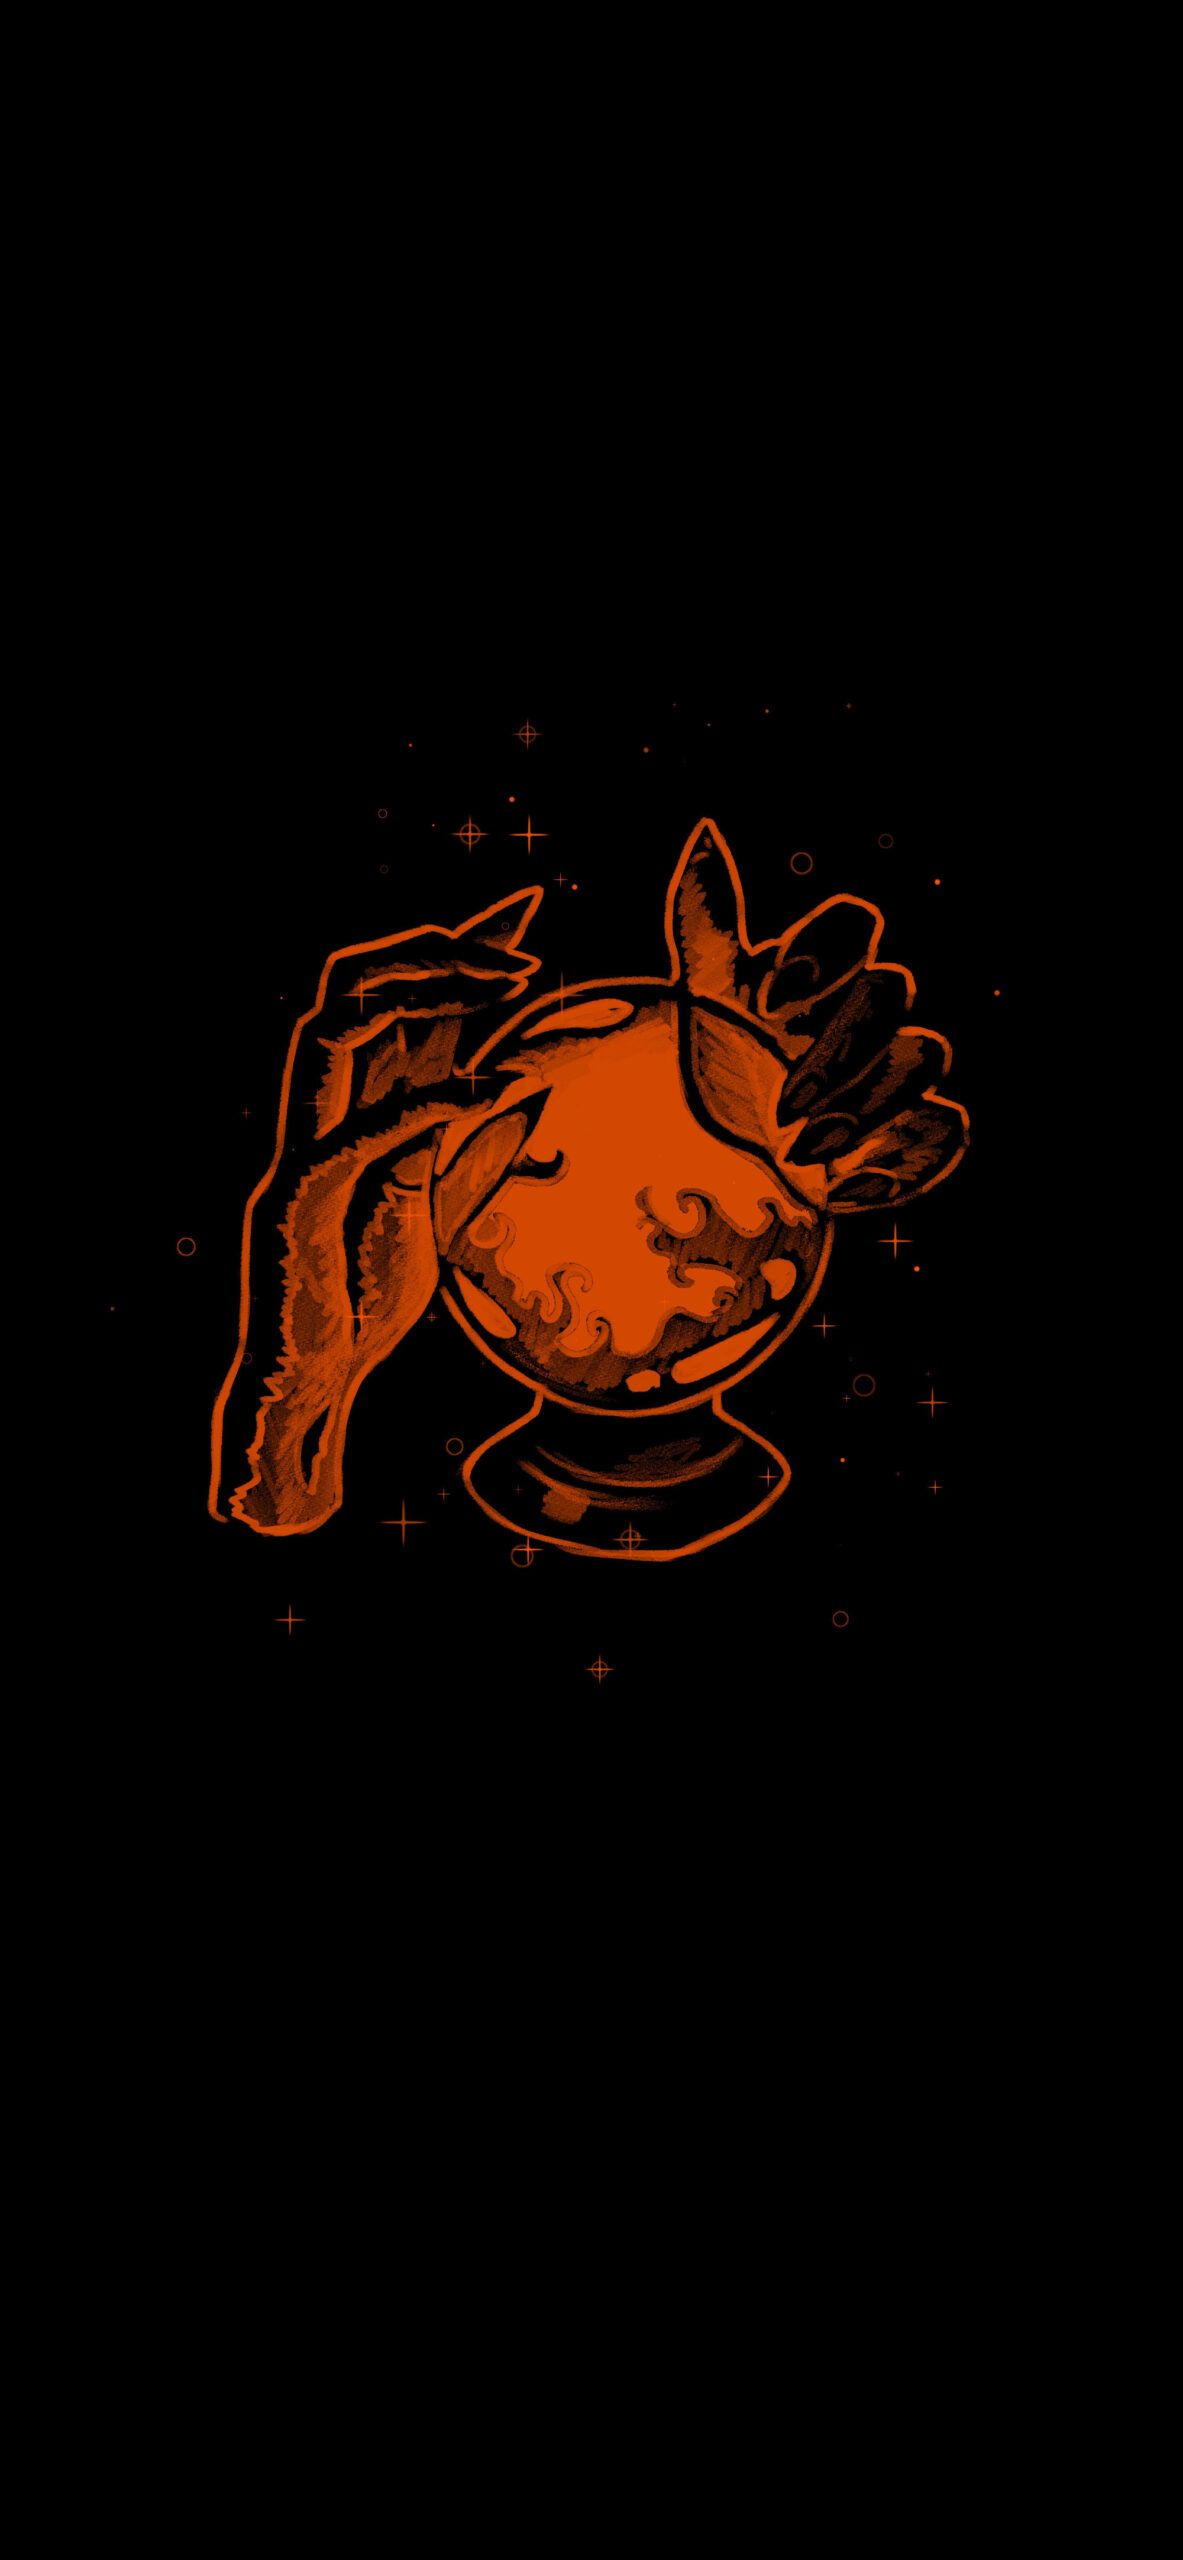 IPhone wallpaper with a fortune teller's hands holding a crystal ball - Witch, magic, dark orange, witchcore